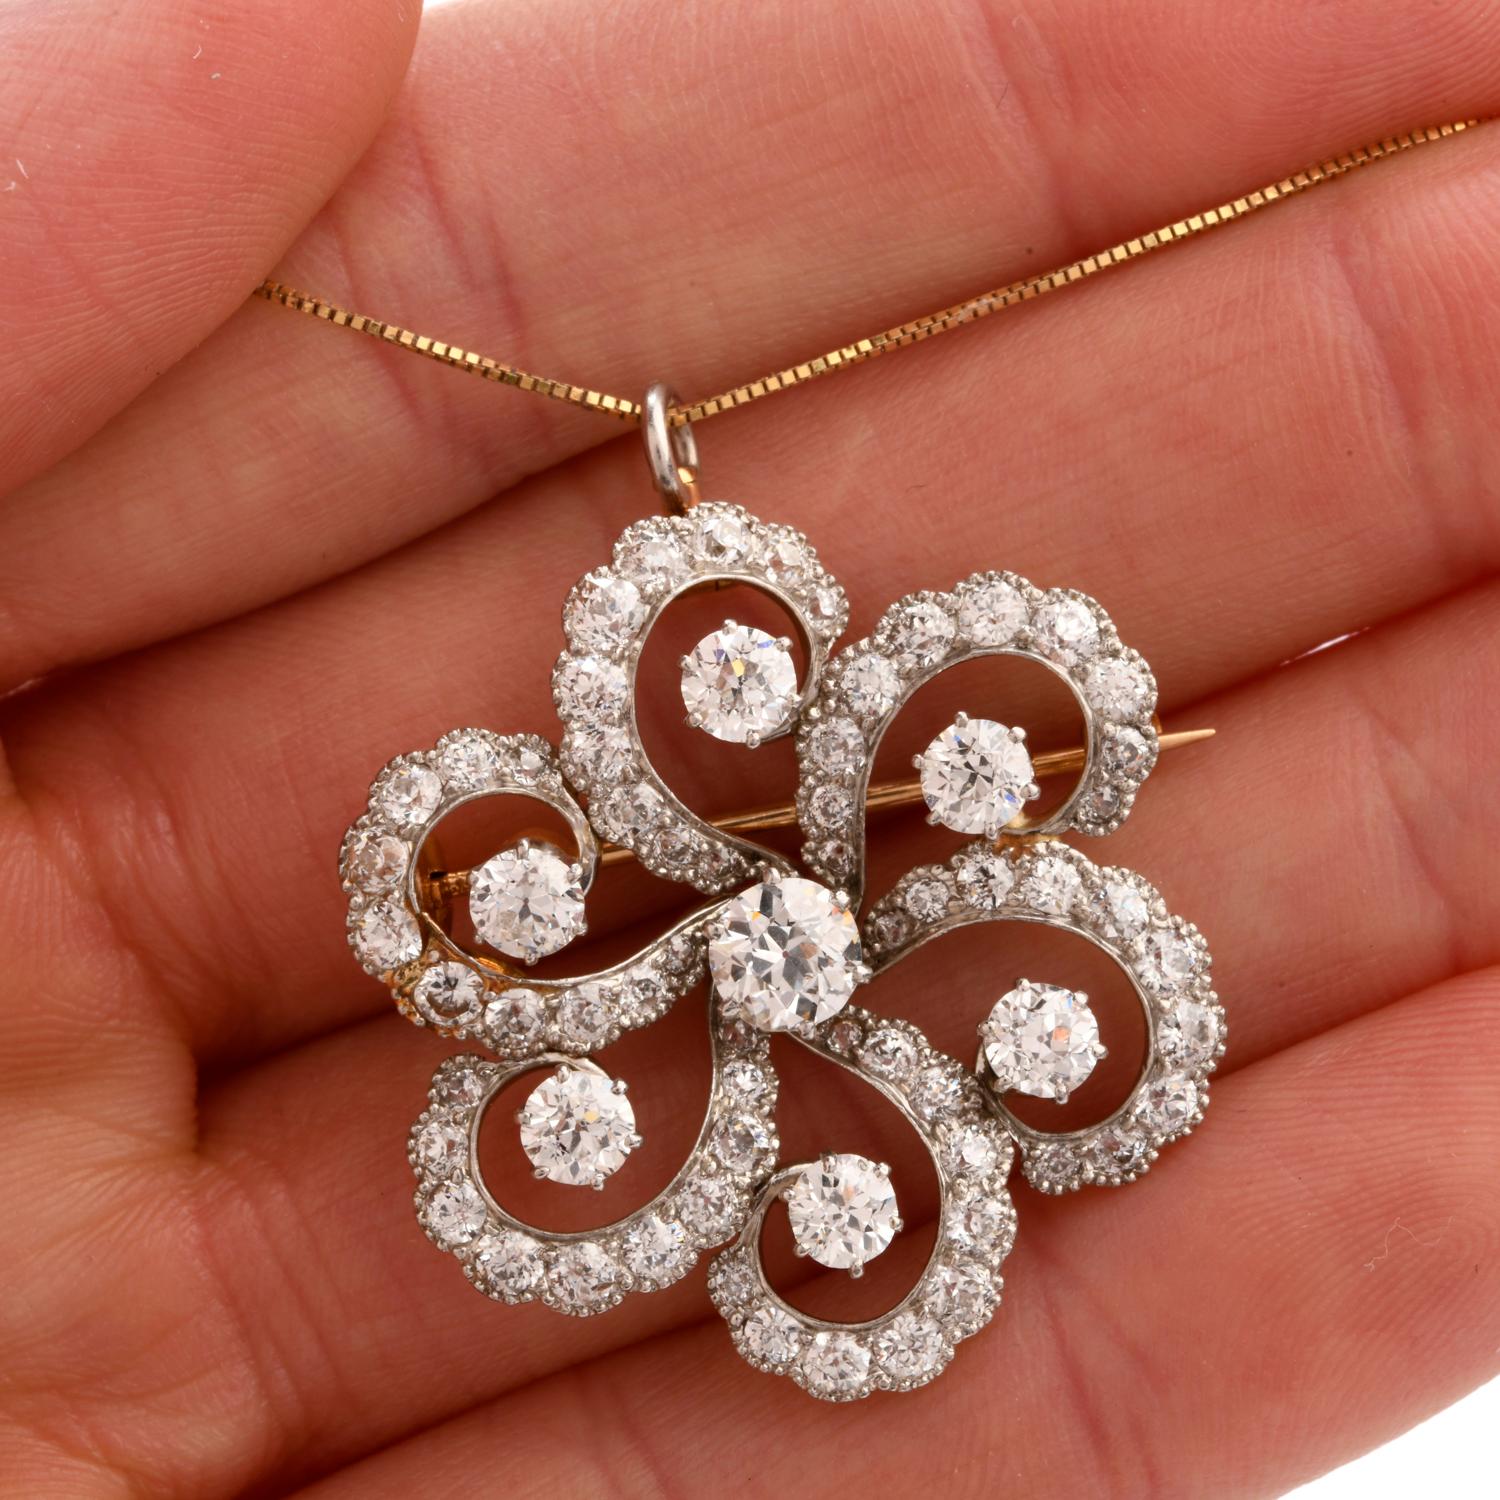 This eye catching Pendant/Brooch was inspired in a Floral motif

and crafted in 18K Gold and Platinum. Larger Diamonds are featured in the centermost area and in the middle of each of the floral

petals.  All Diamonds European and  weigh